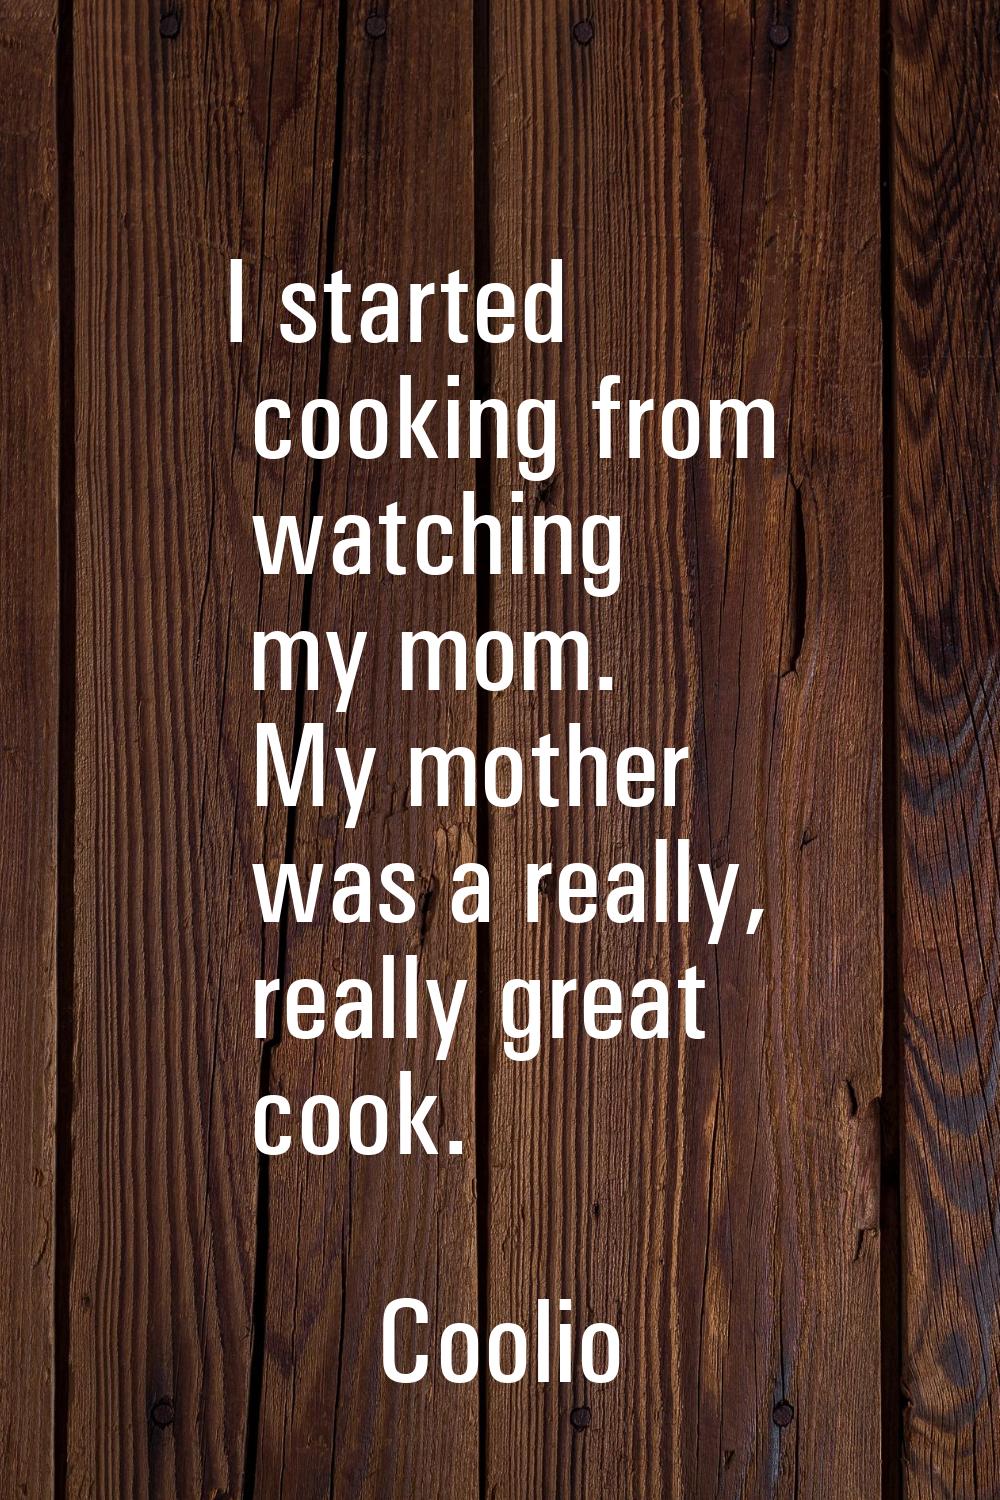 I started cooking from watching my mom. My mother was a really, really great cook.